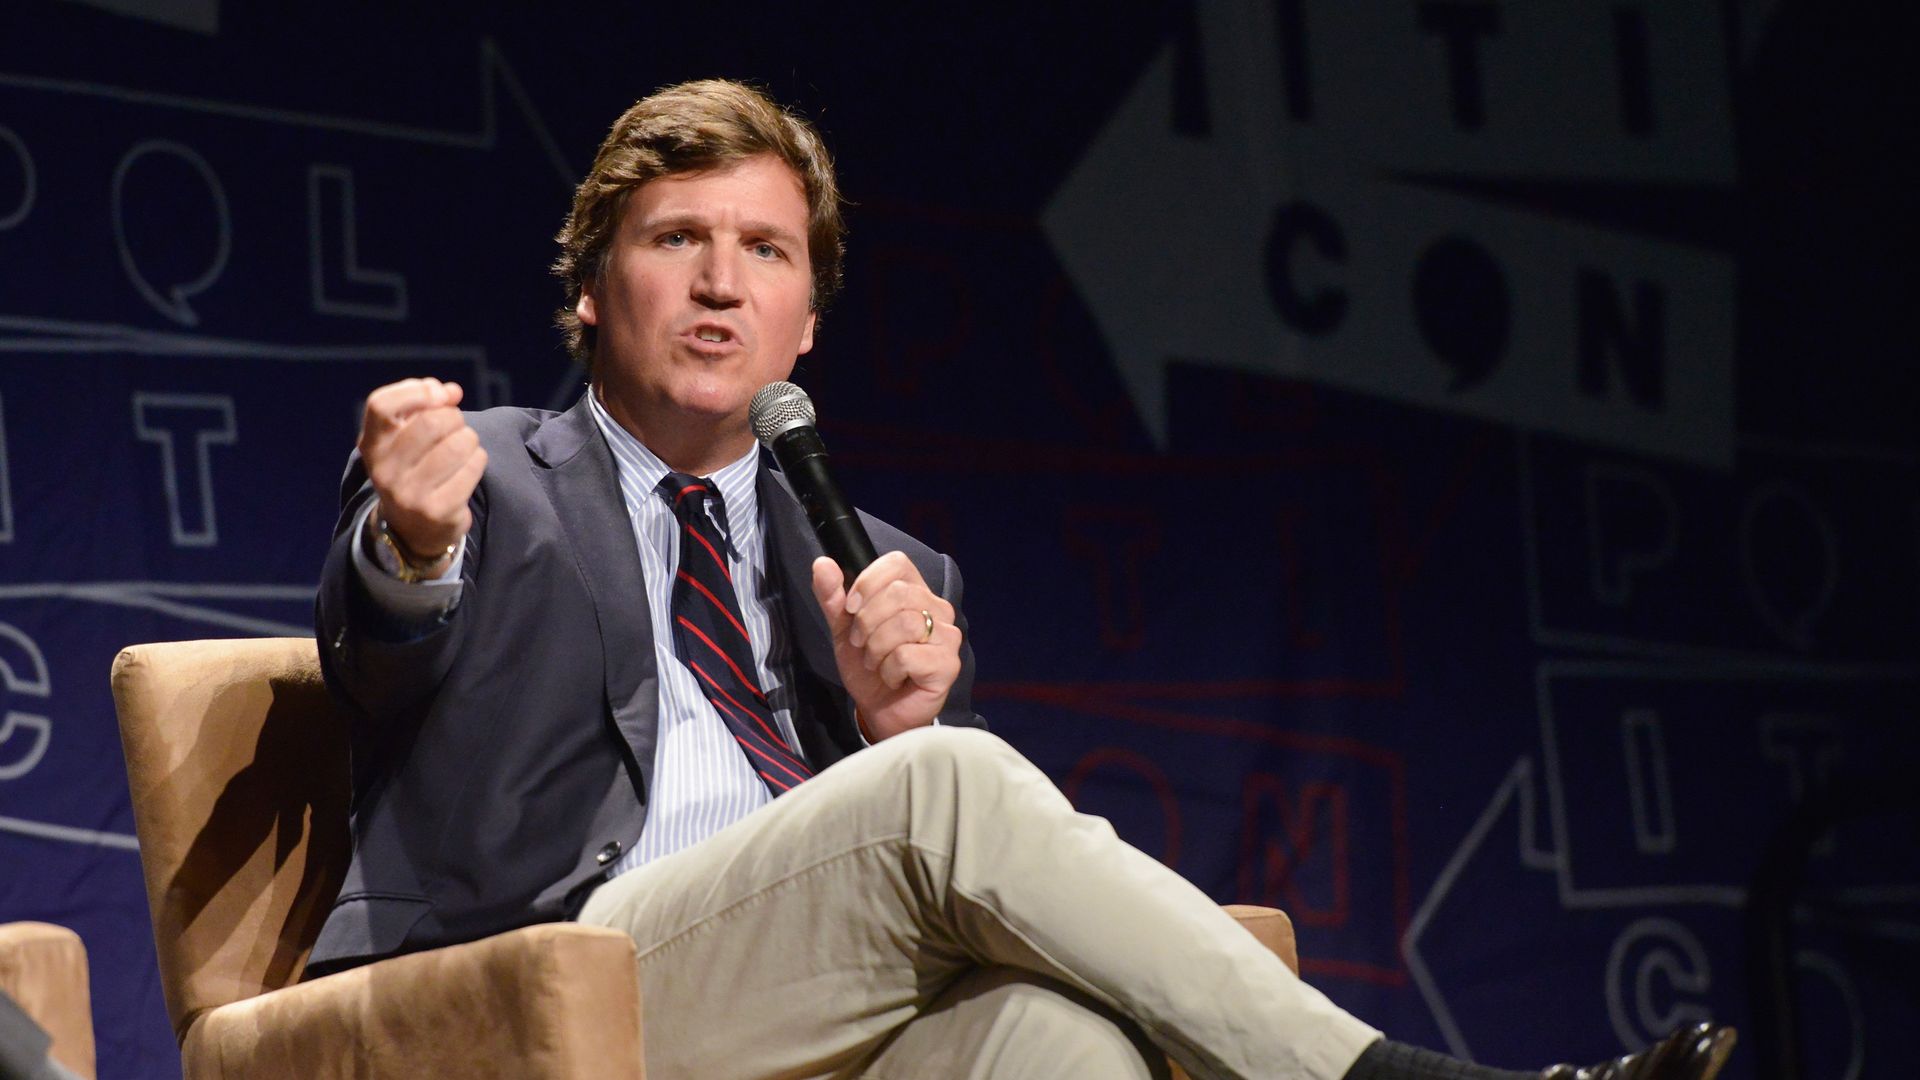 Photo of Tucker Carlson speaking into a microphone with one fist raised as he sits cross-legged in a one-person couch on a stage